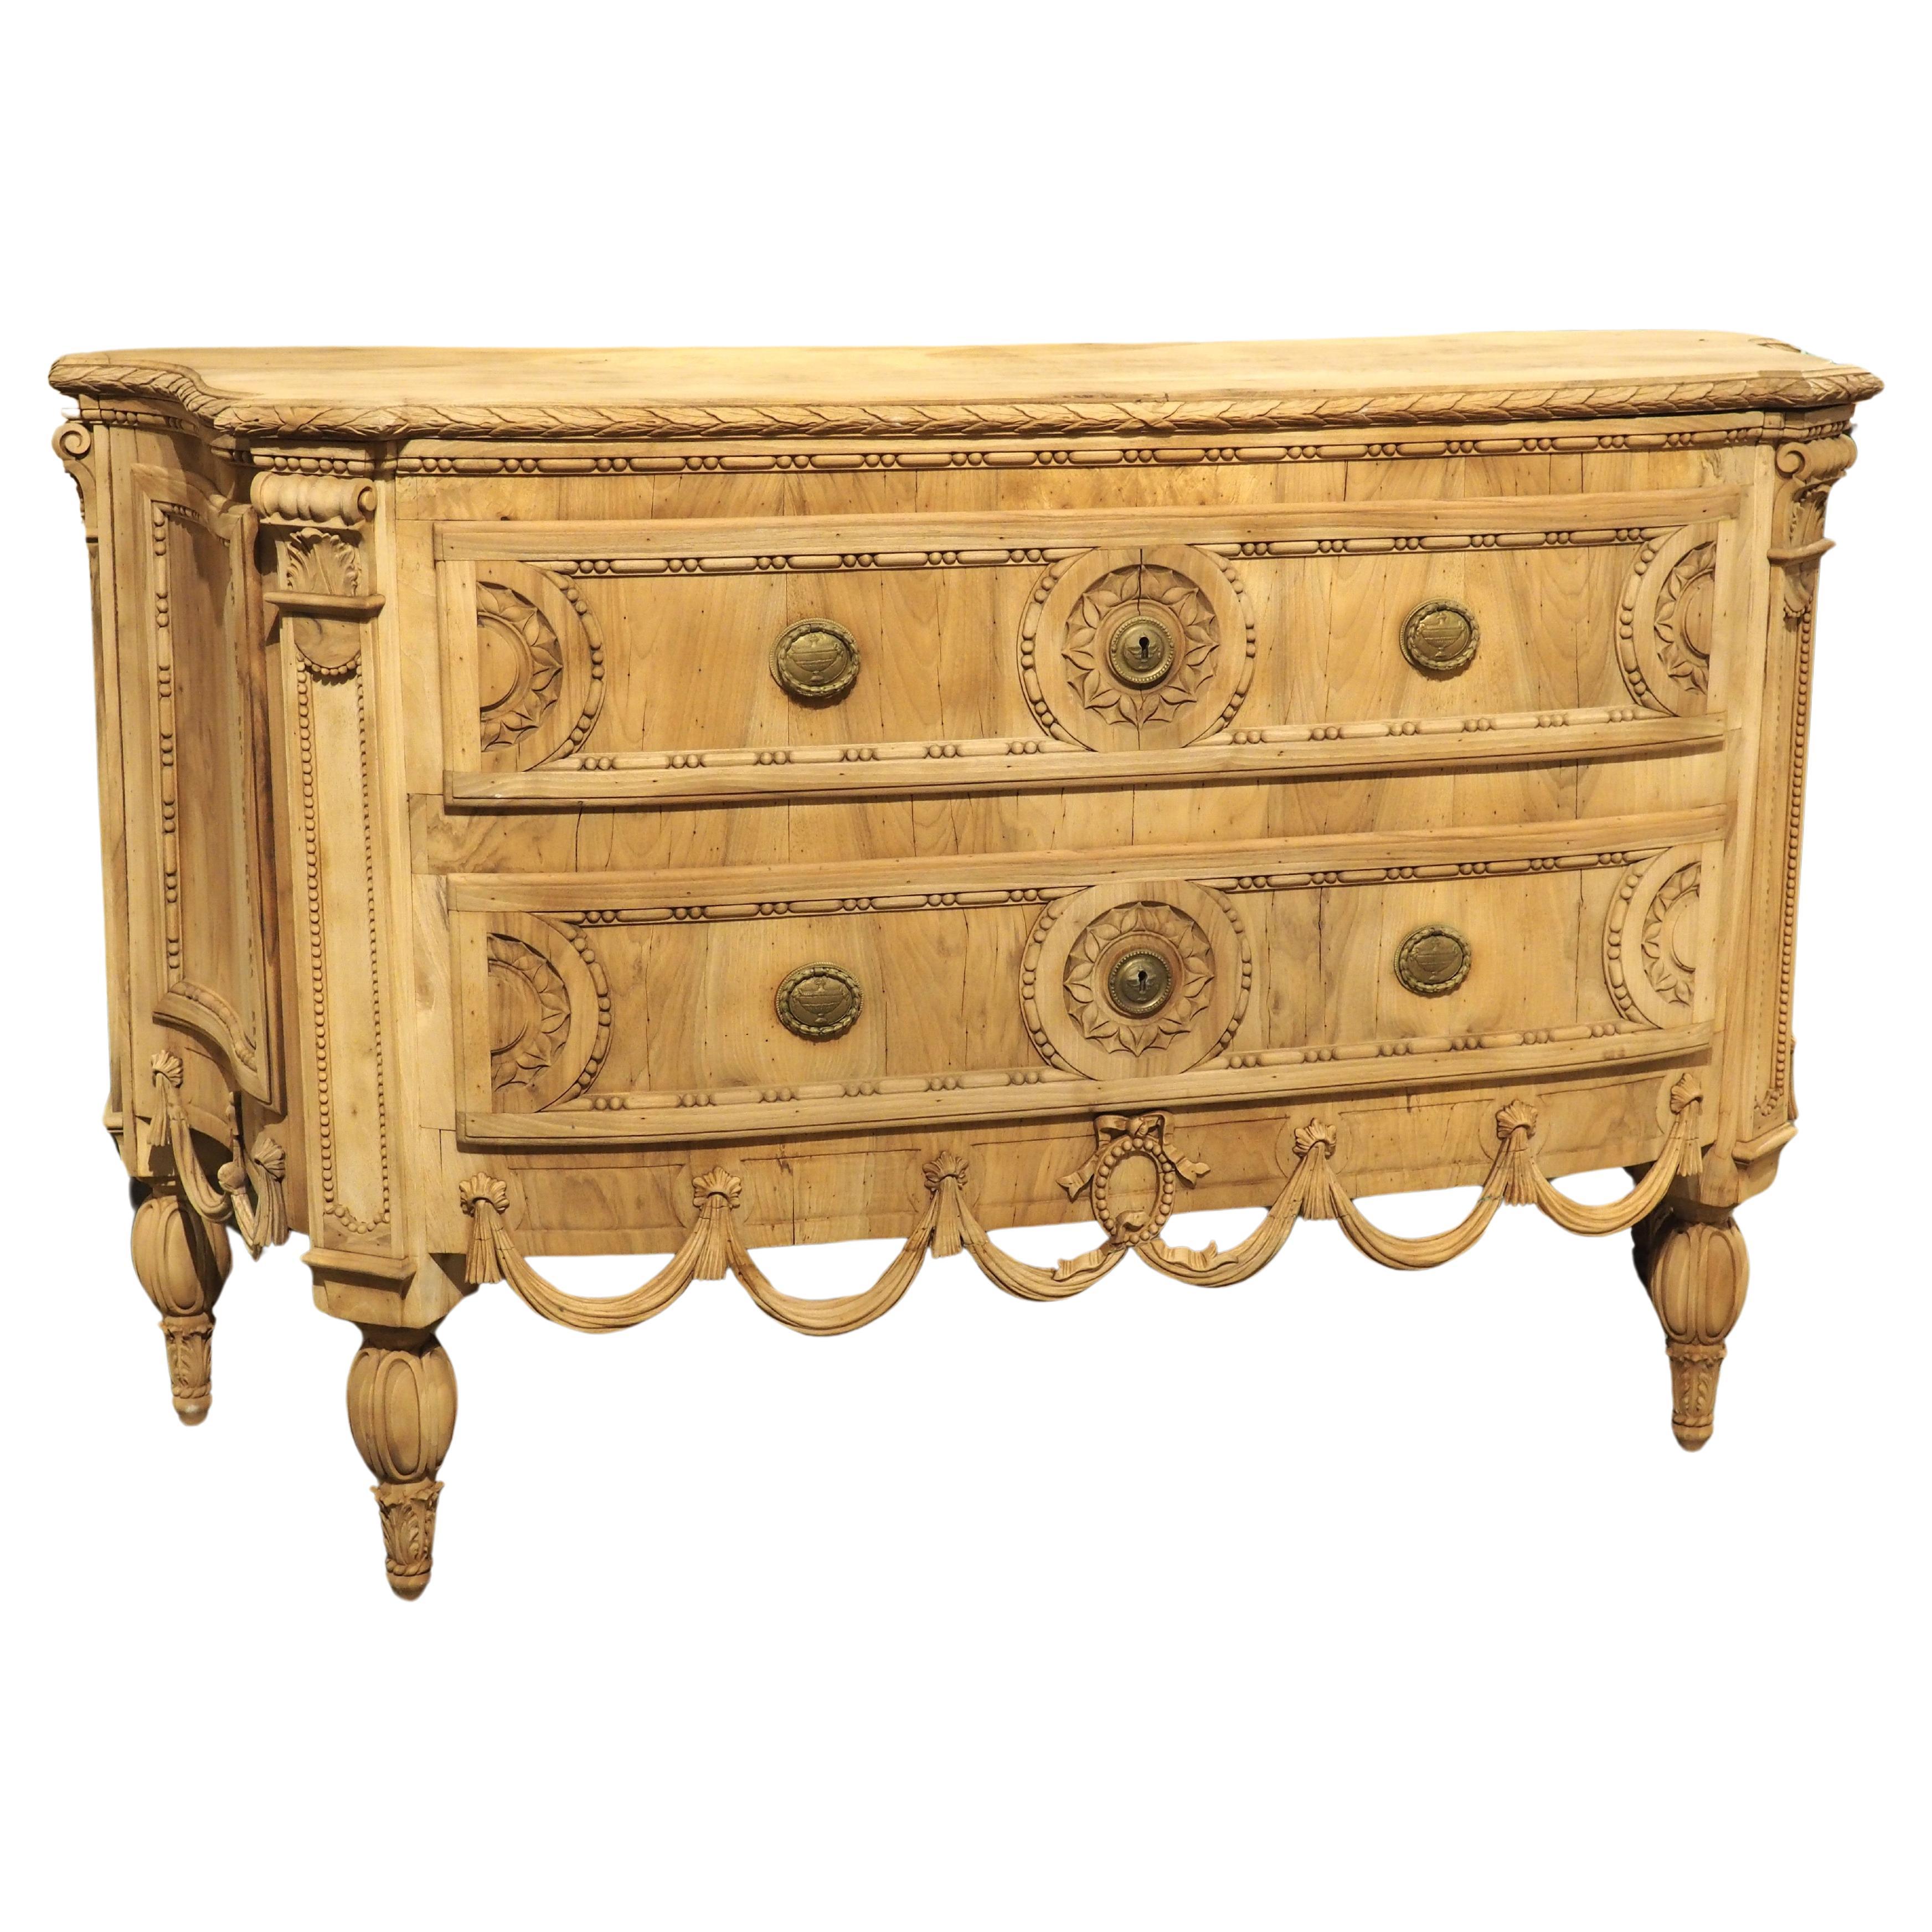 Circa 1870 Louis XVI Style Bleached Walnut Drapery Swag Commode from Italy